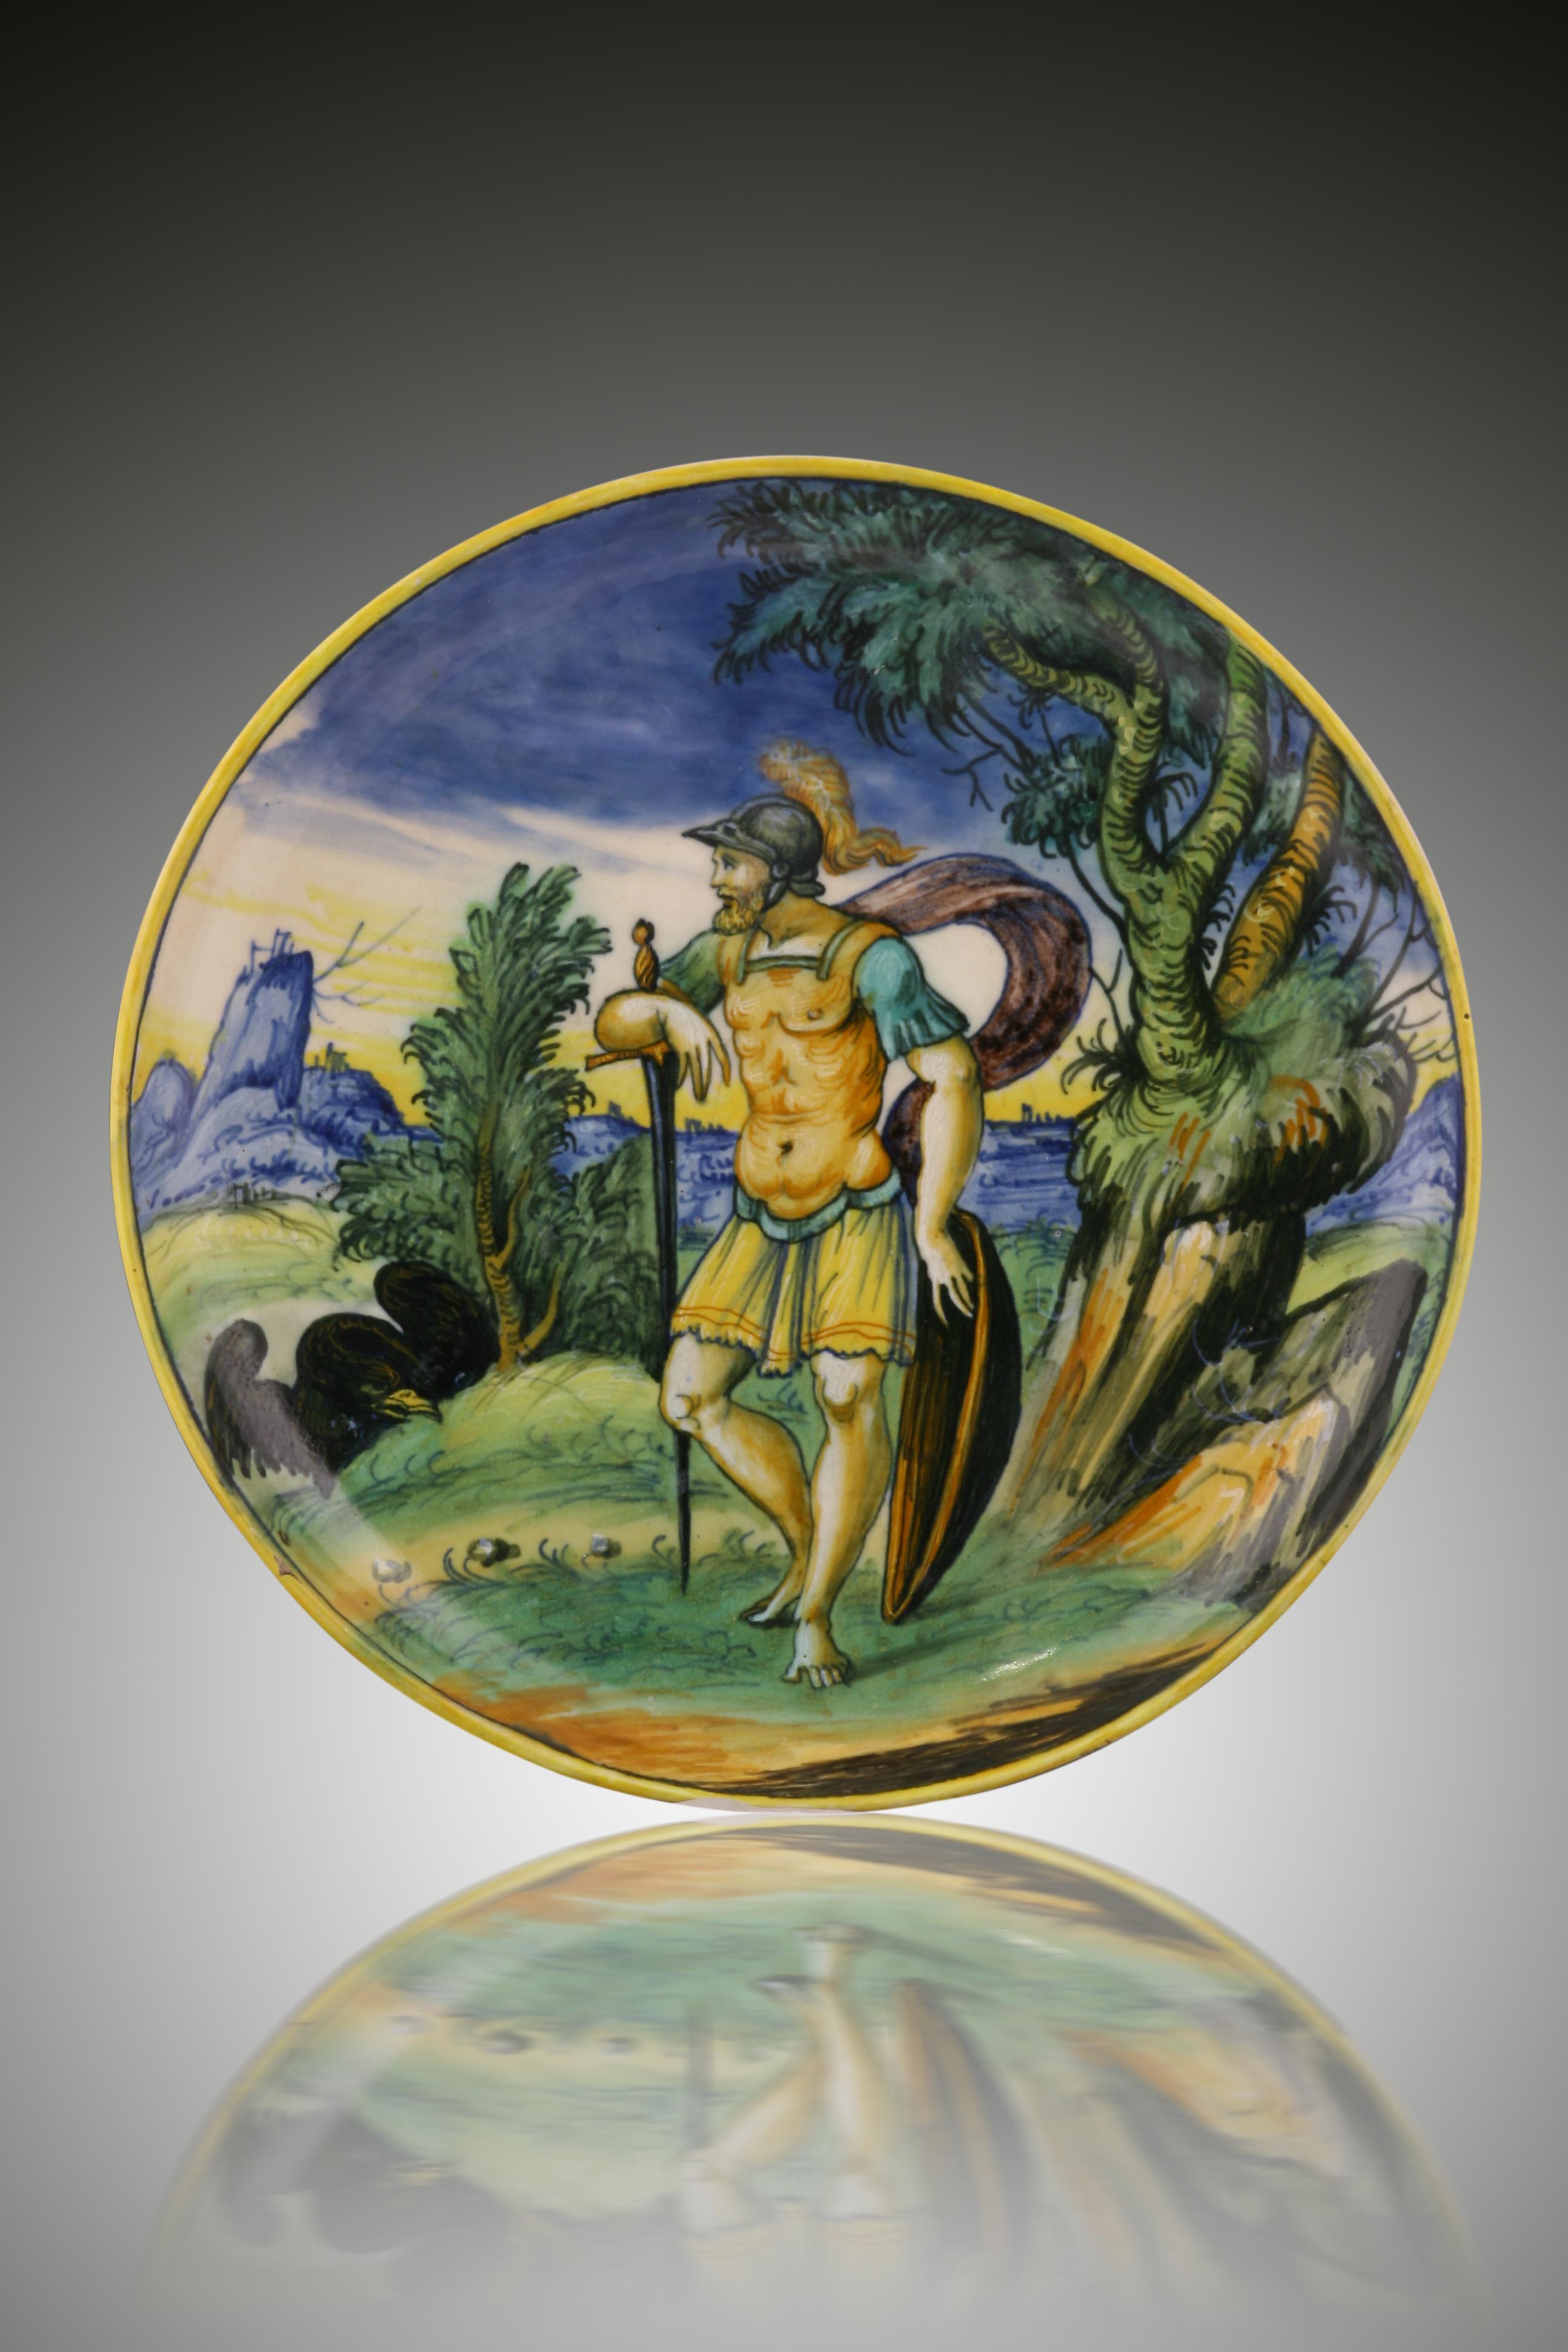 A Venezia Maiolica istoriato footed dish, circa 1550-1560.
Probably by Mazo, painted with a scene depicting a soldier, perhaps Jupiter, watched by an eagle, all in a wooded landscape with sea and mountains.
Measures: Diameter 26.2 cm, height 4.7